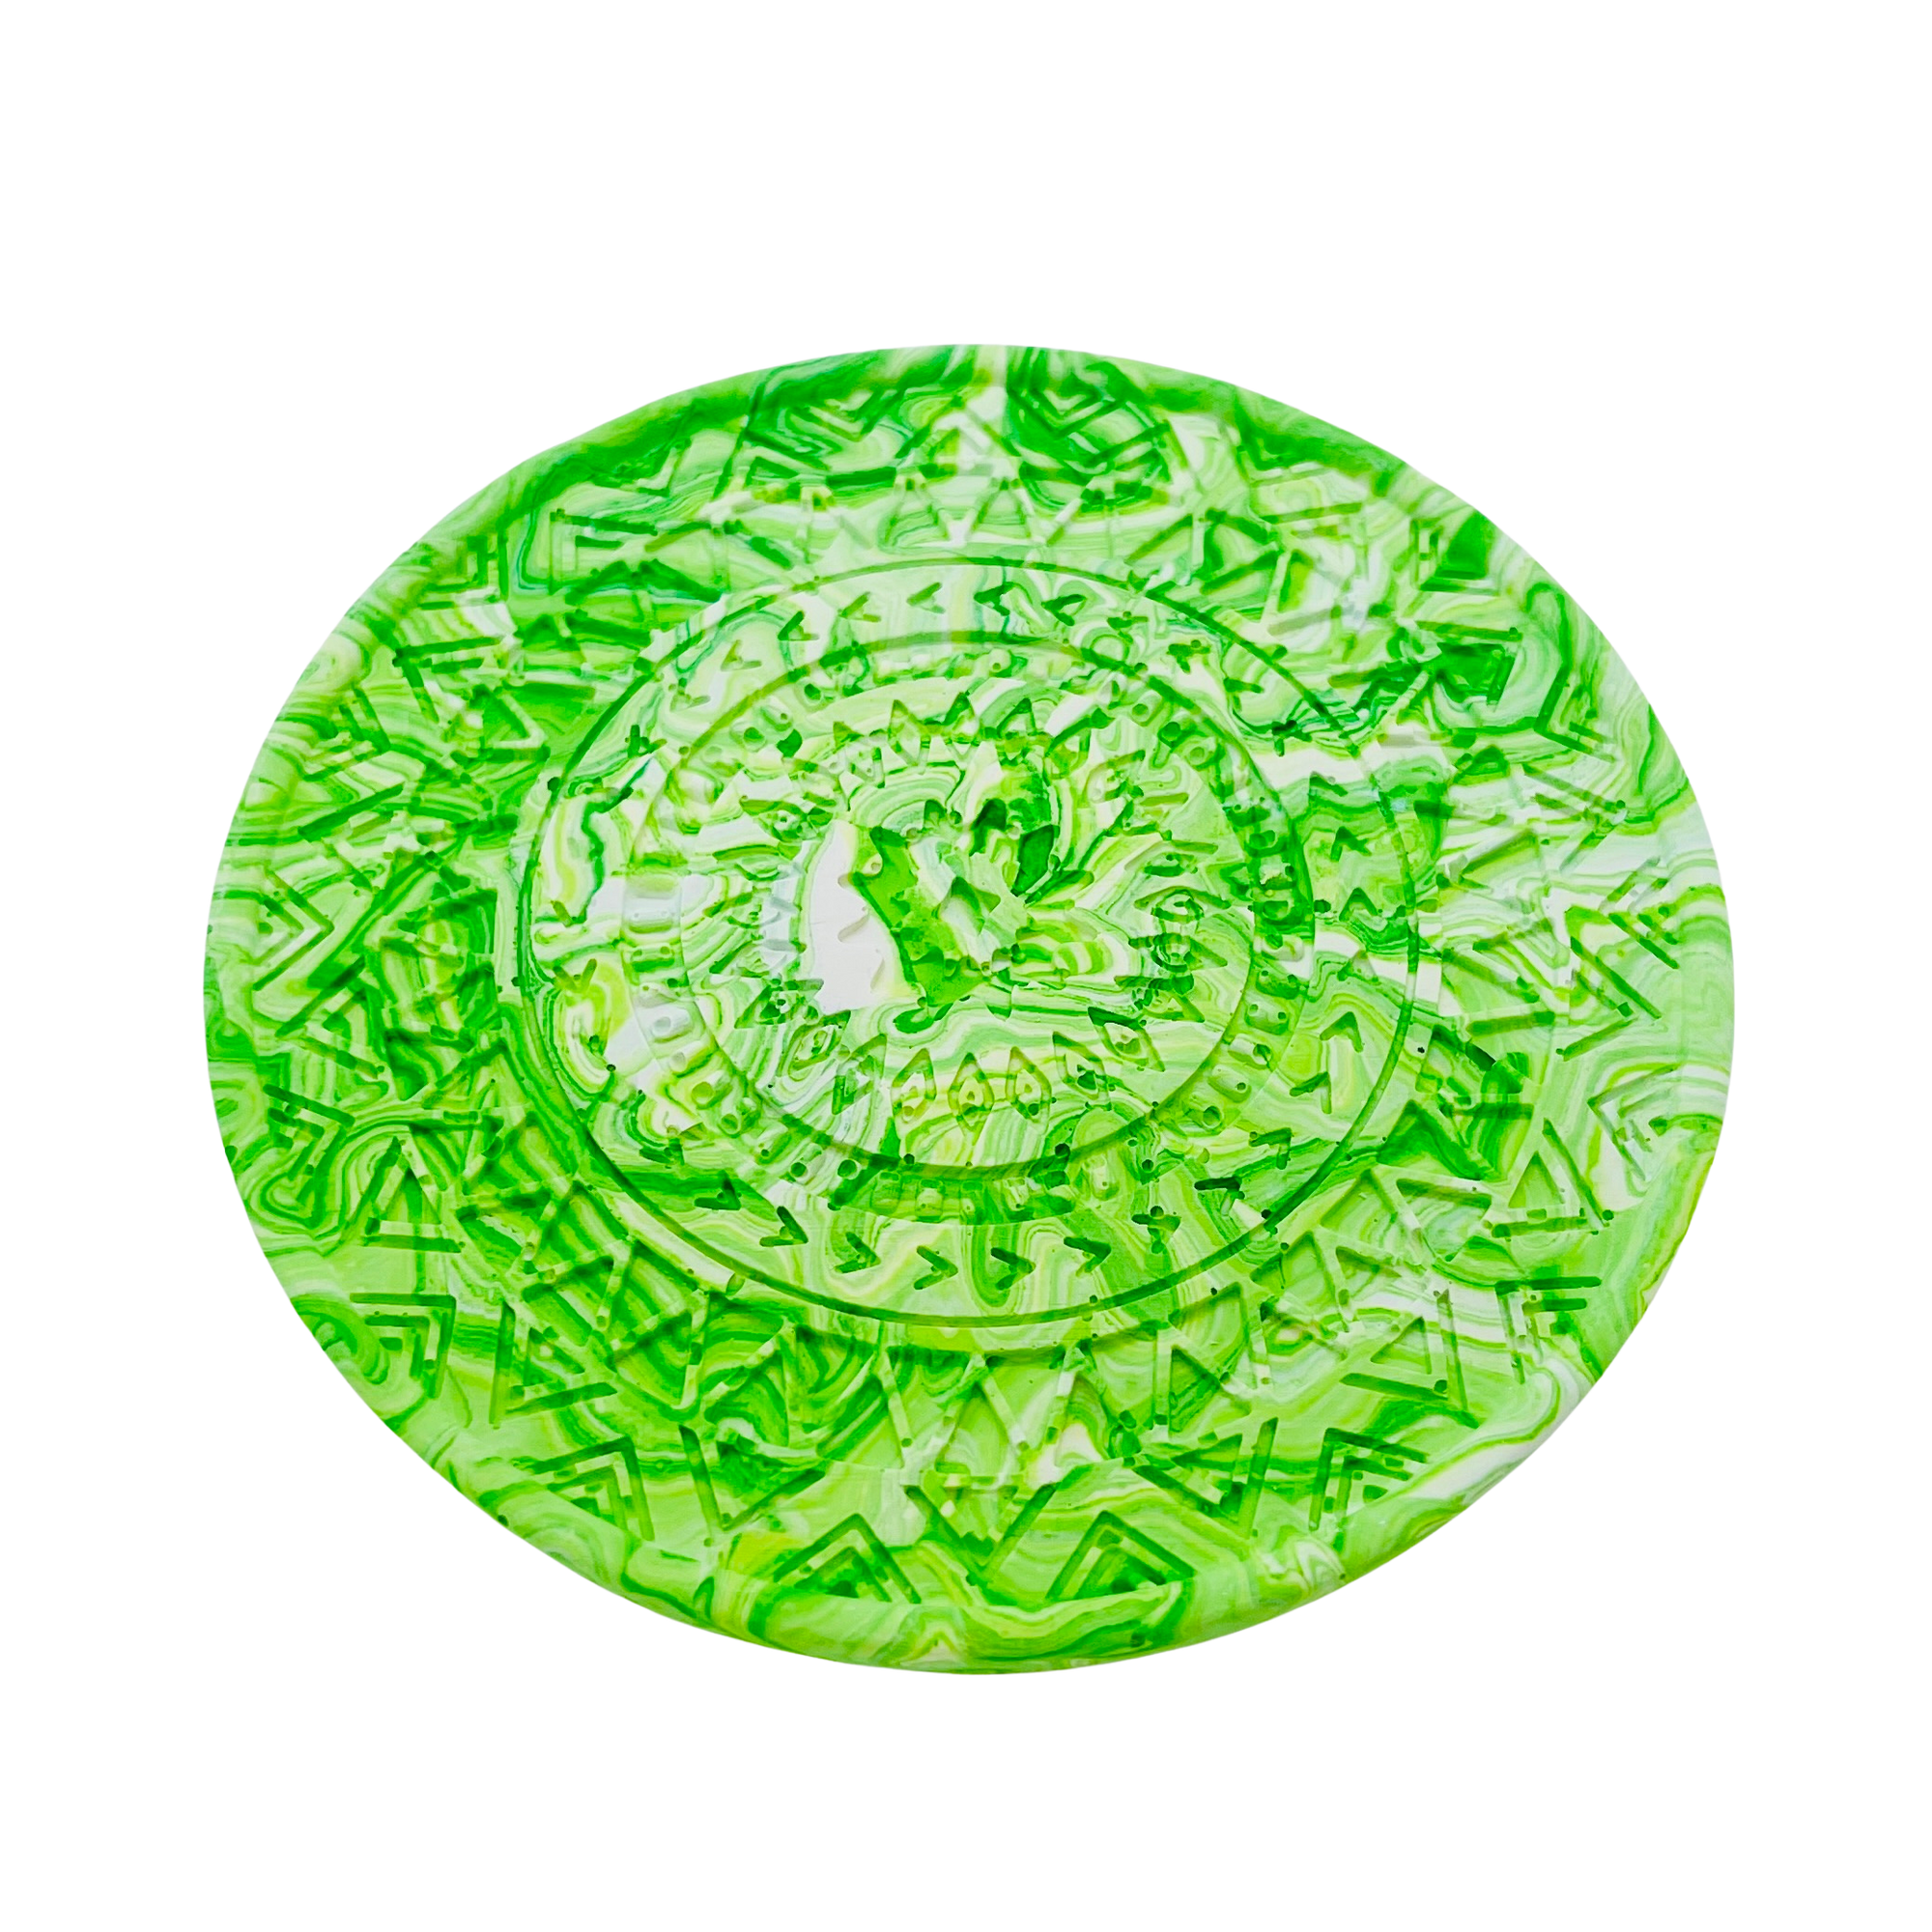 A circular mandela coaster measuring 9.3cm in diameter and 0.8 cm in height marbled with lime green pigment.